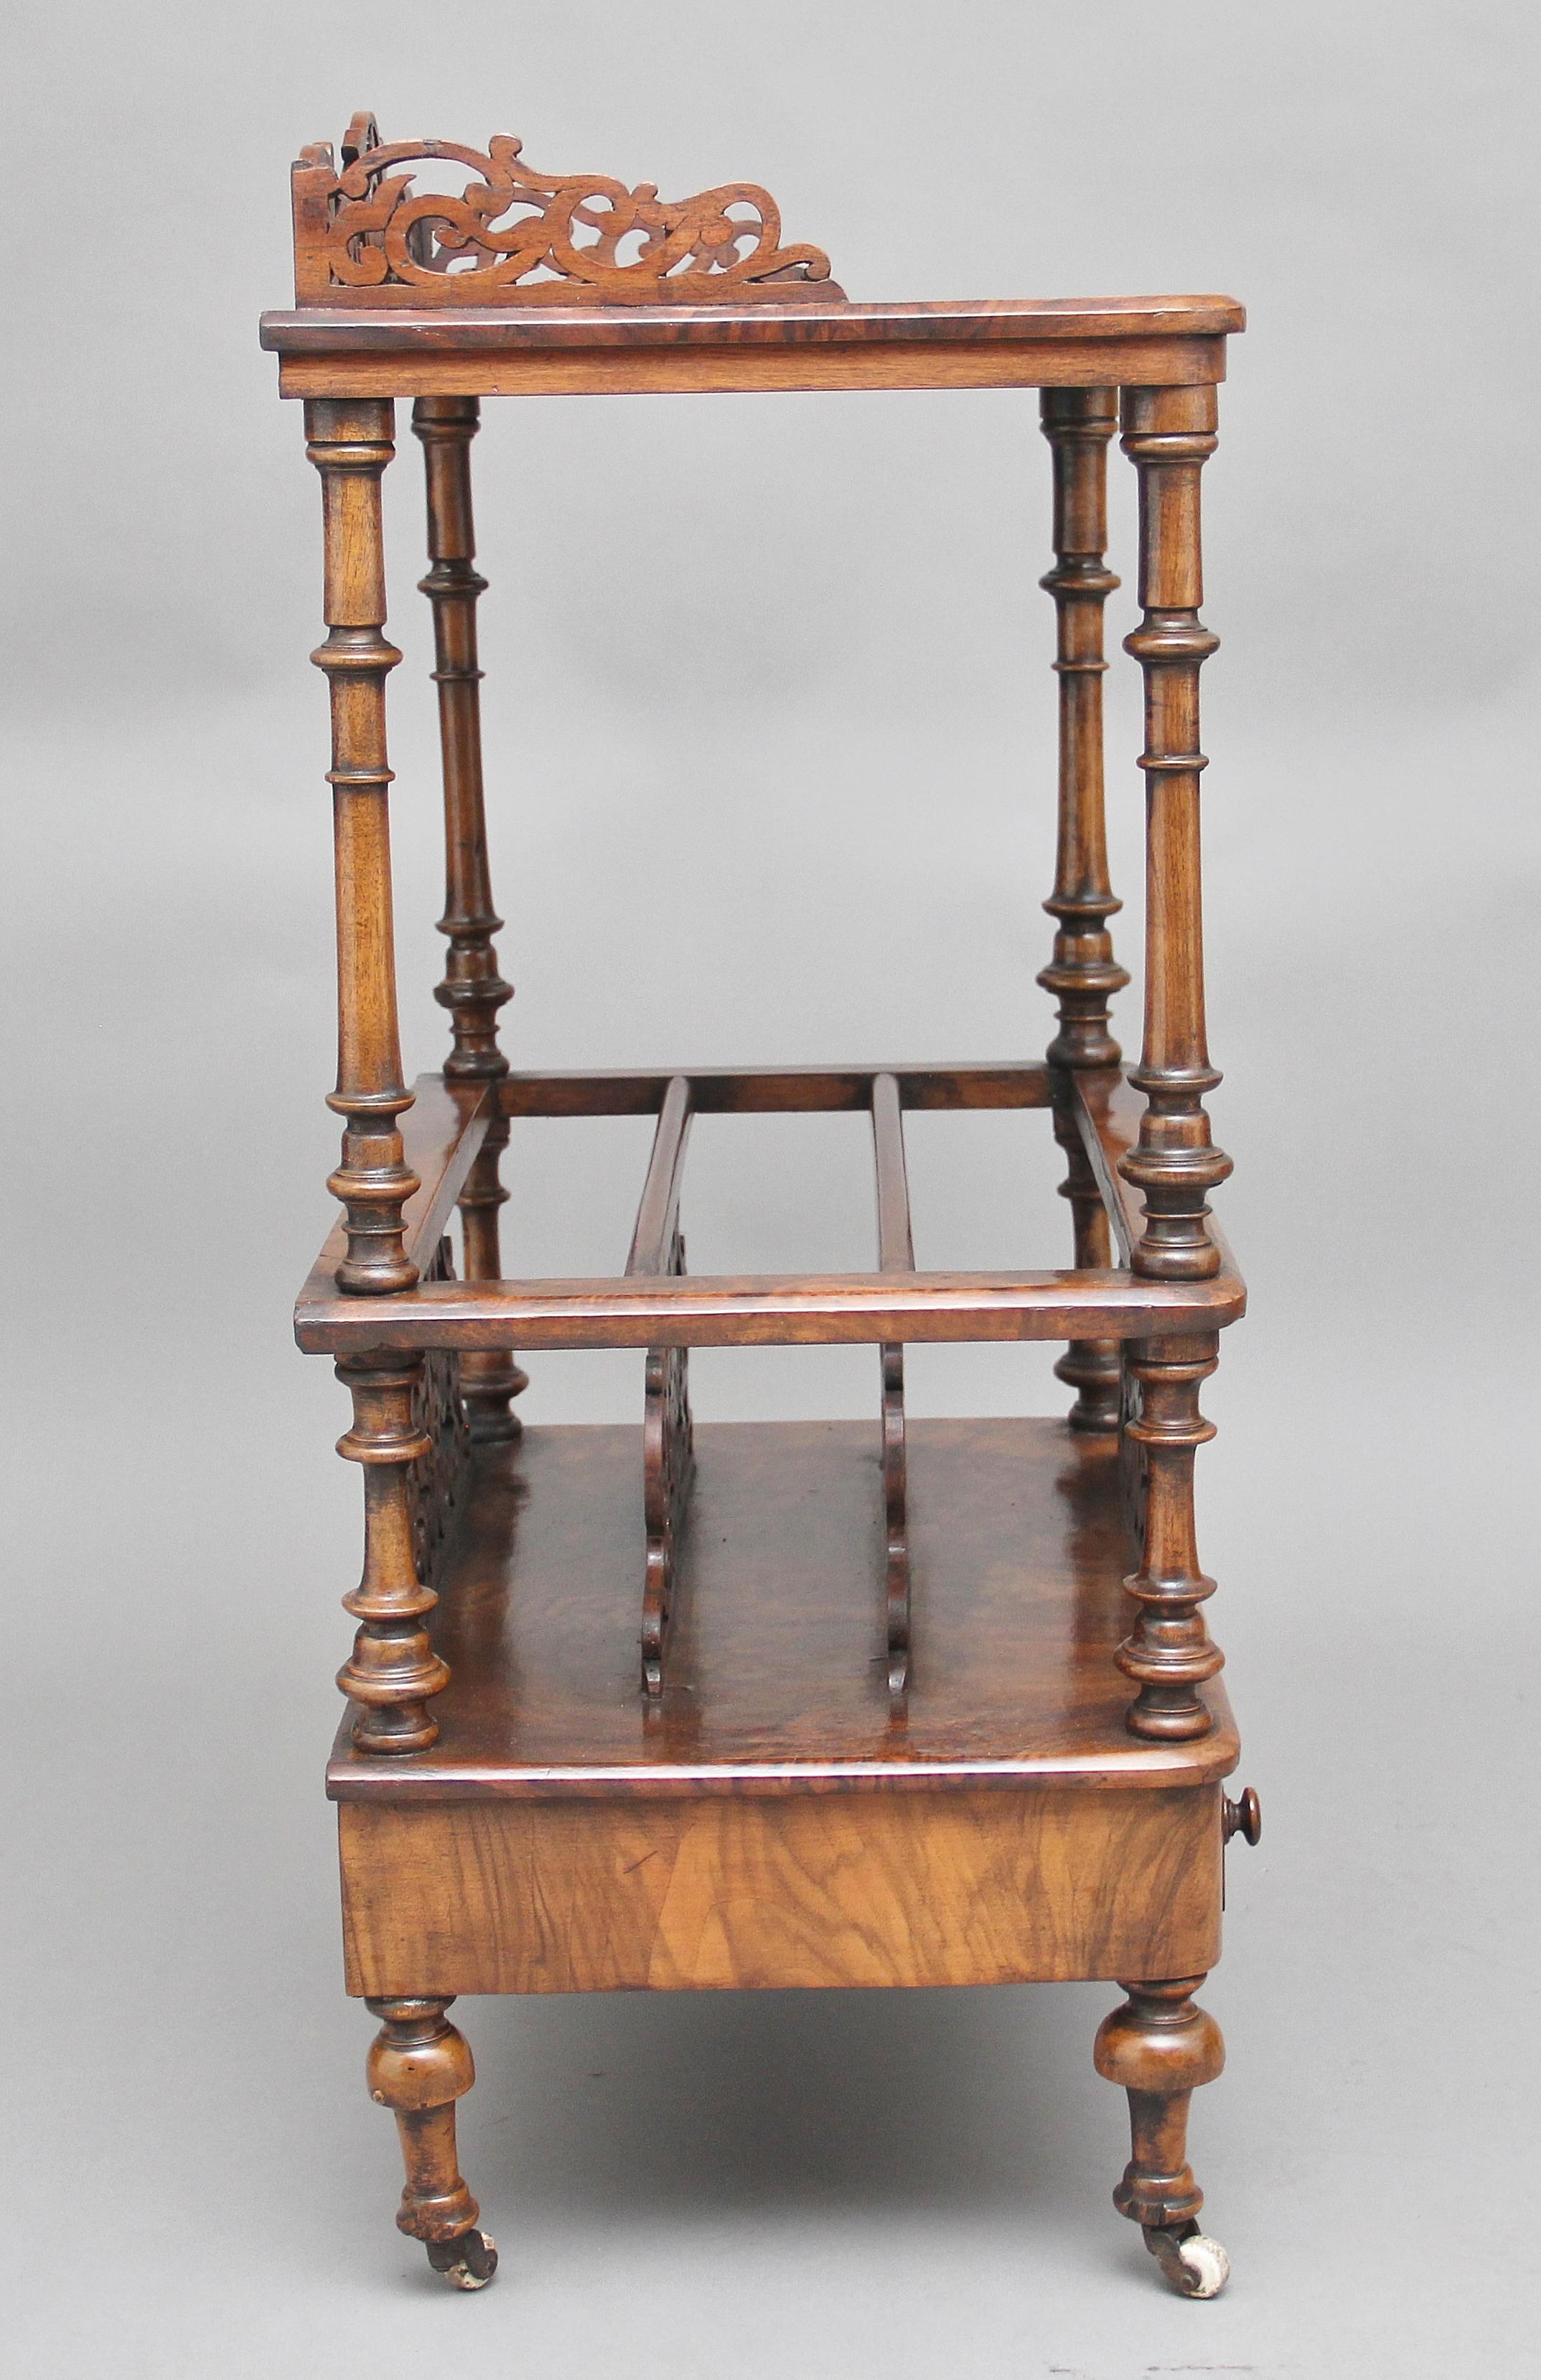 English 19th Century burr walnut Canterbury with a carved and pierced gallery